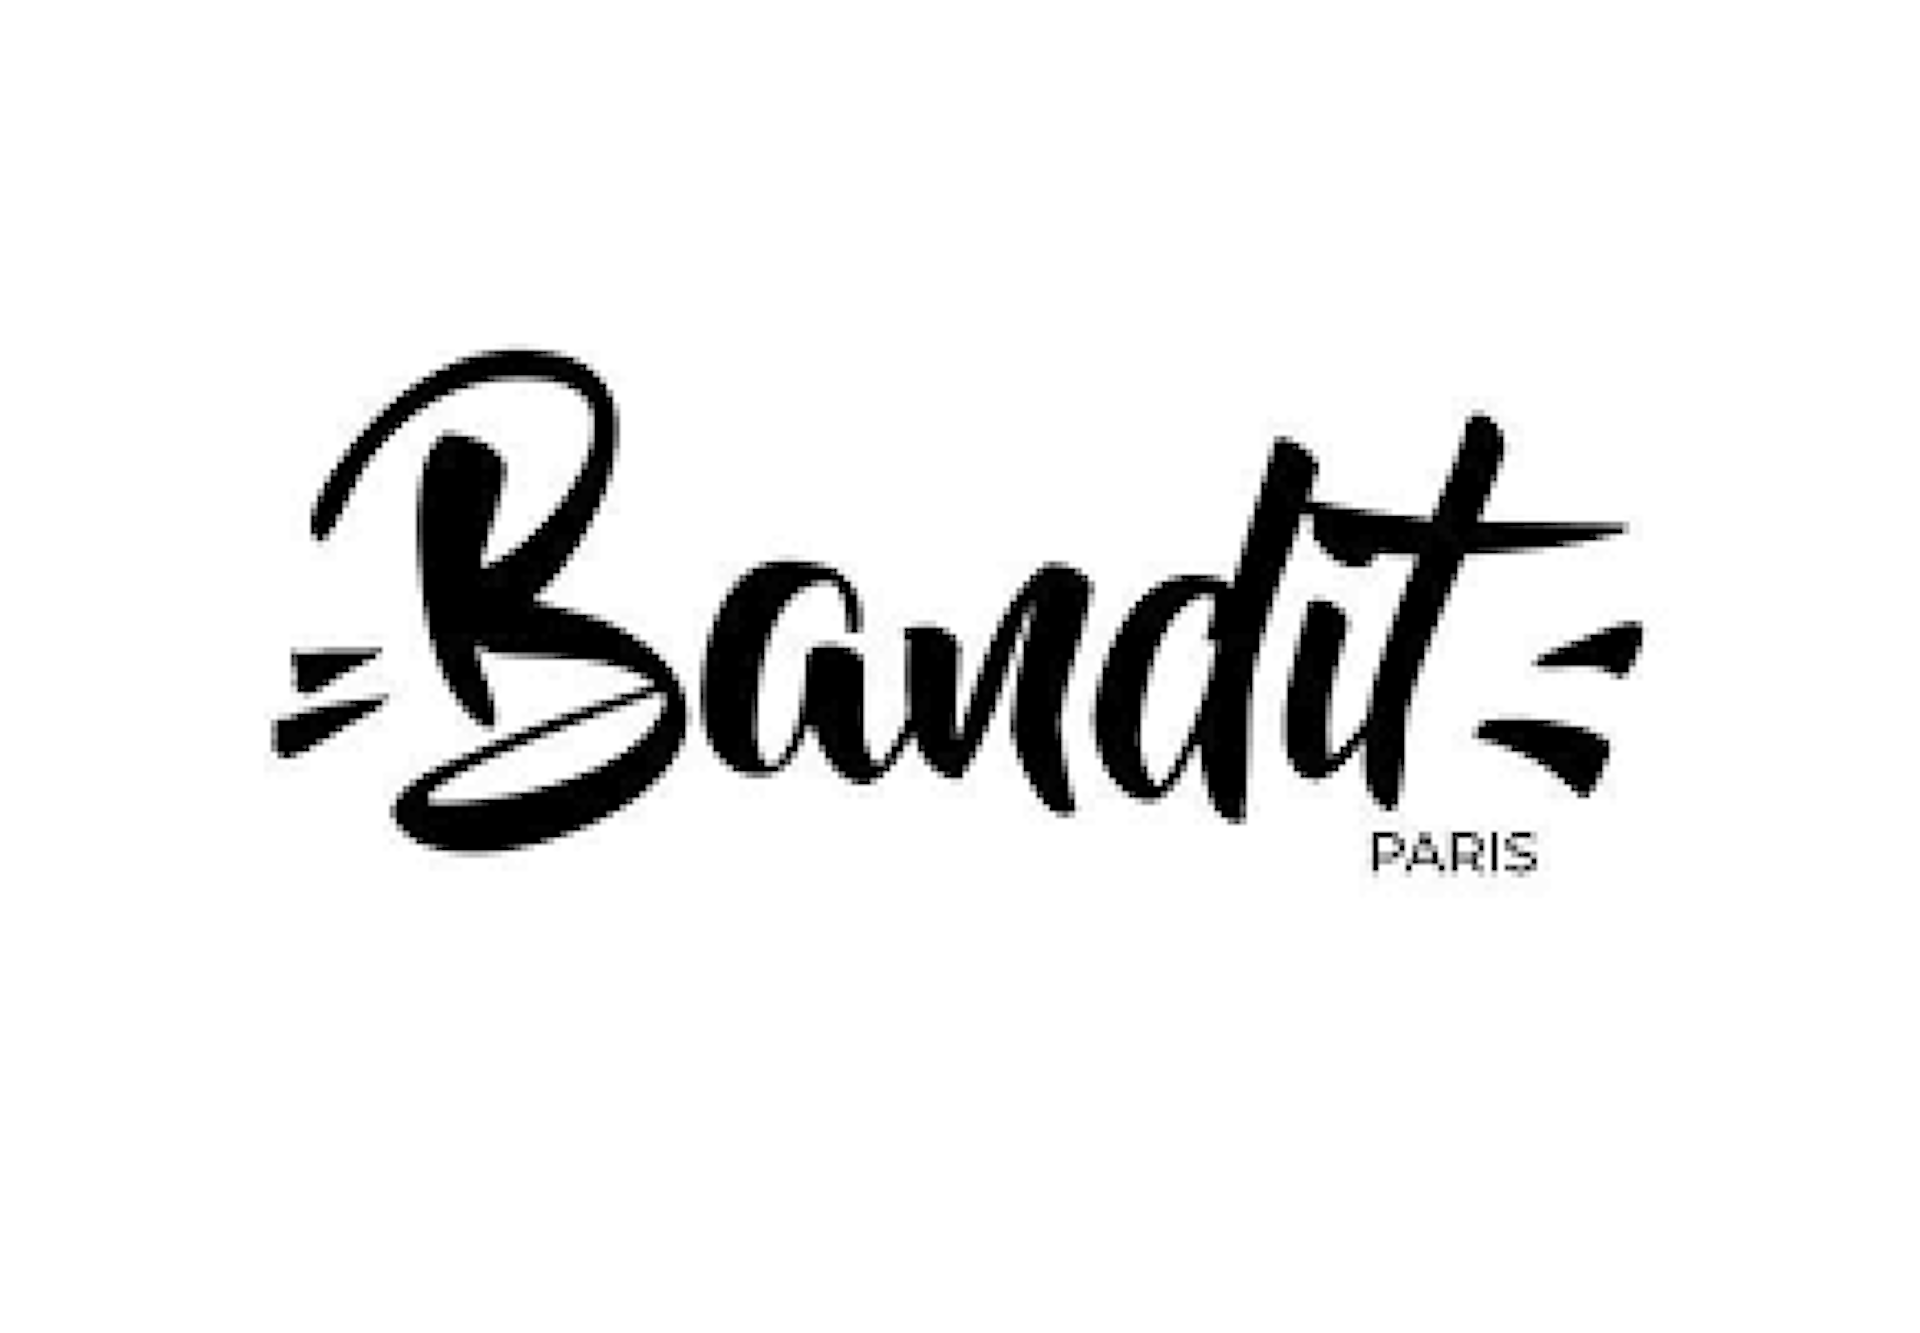 DNVBs like Bandit Paris who want to set up their media plan